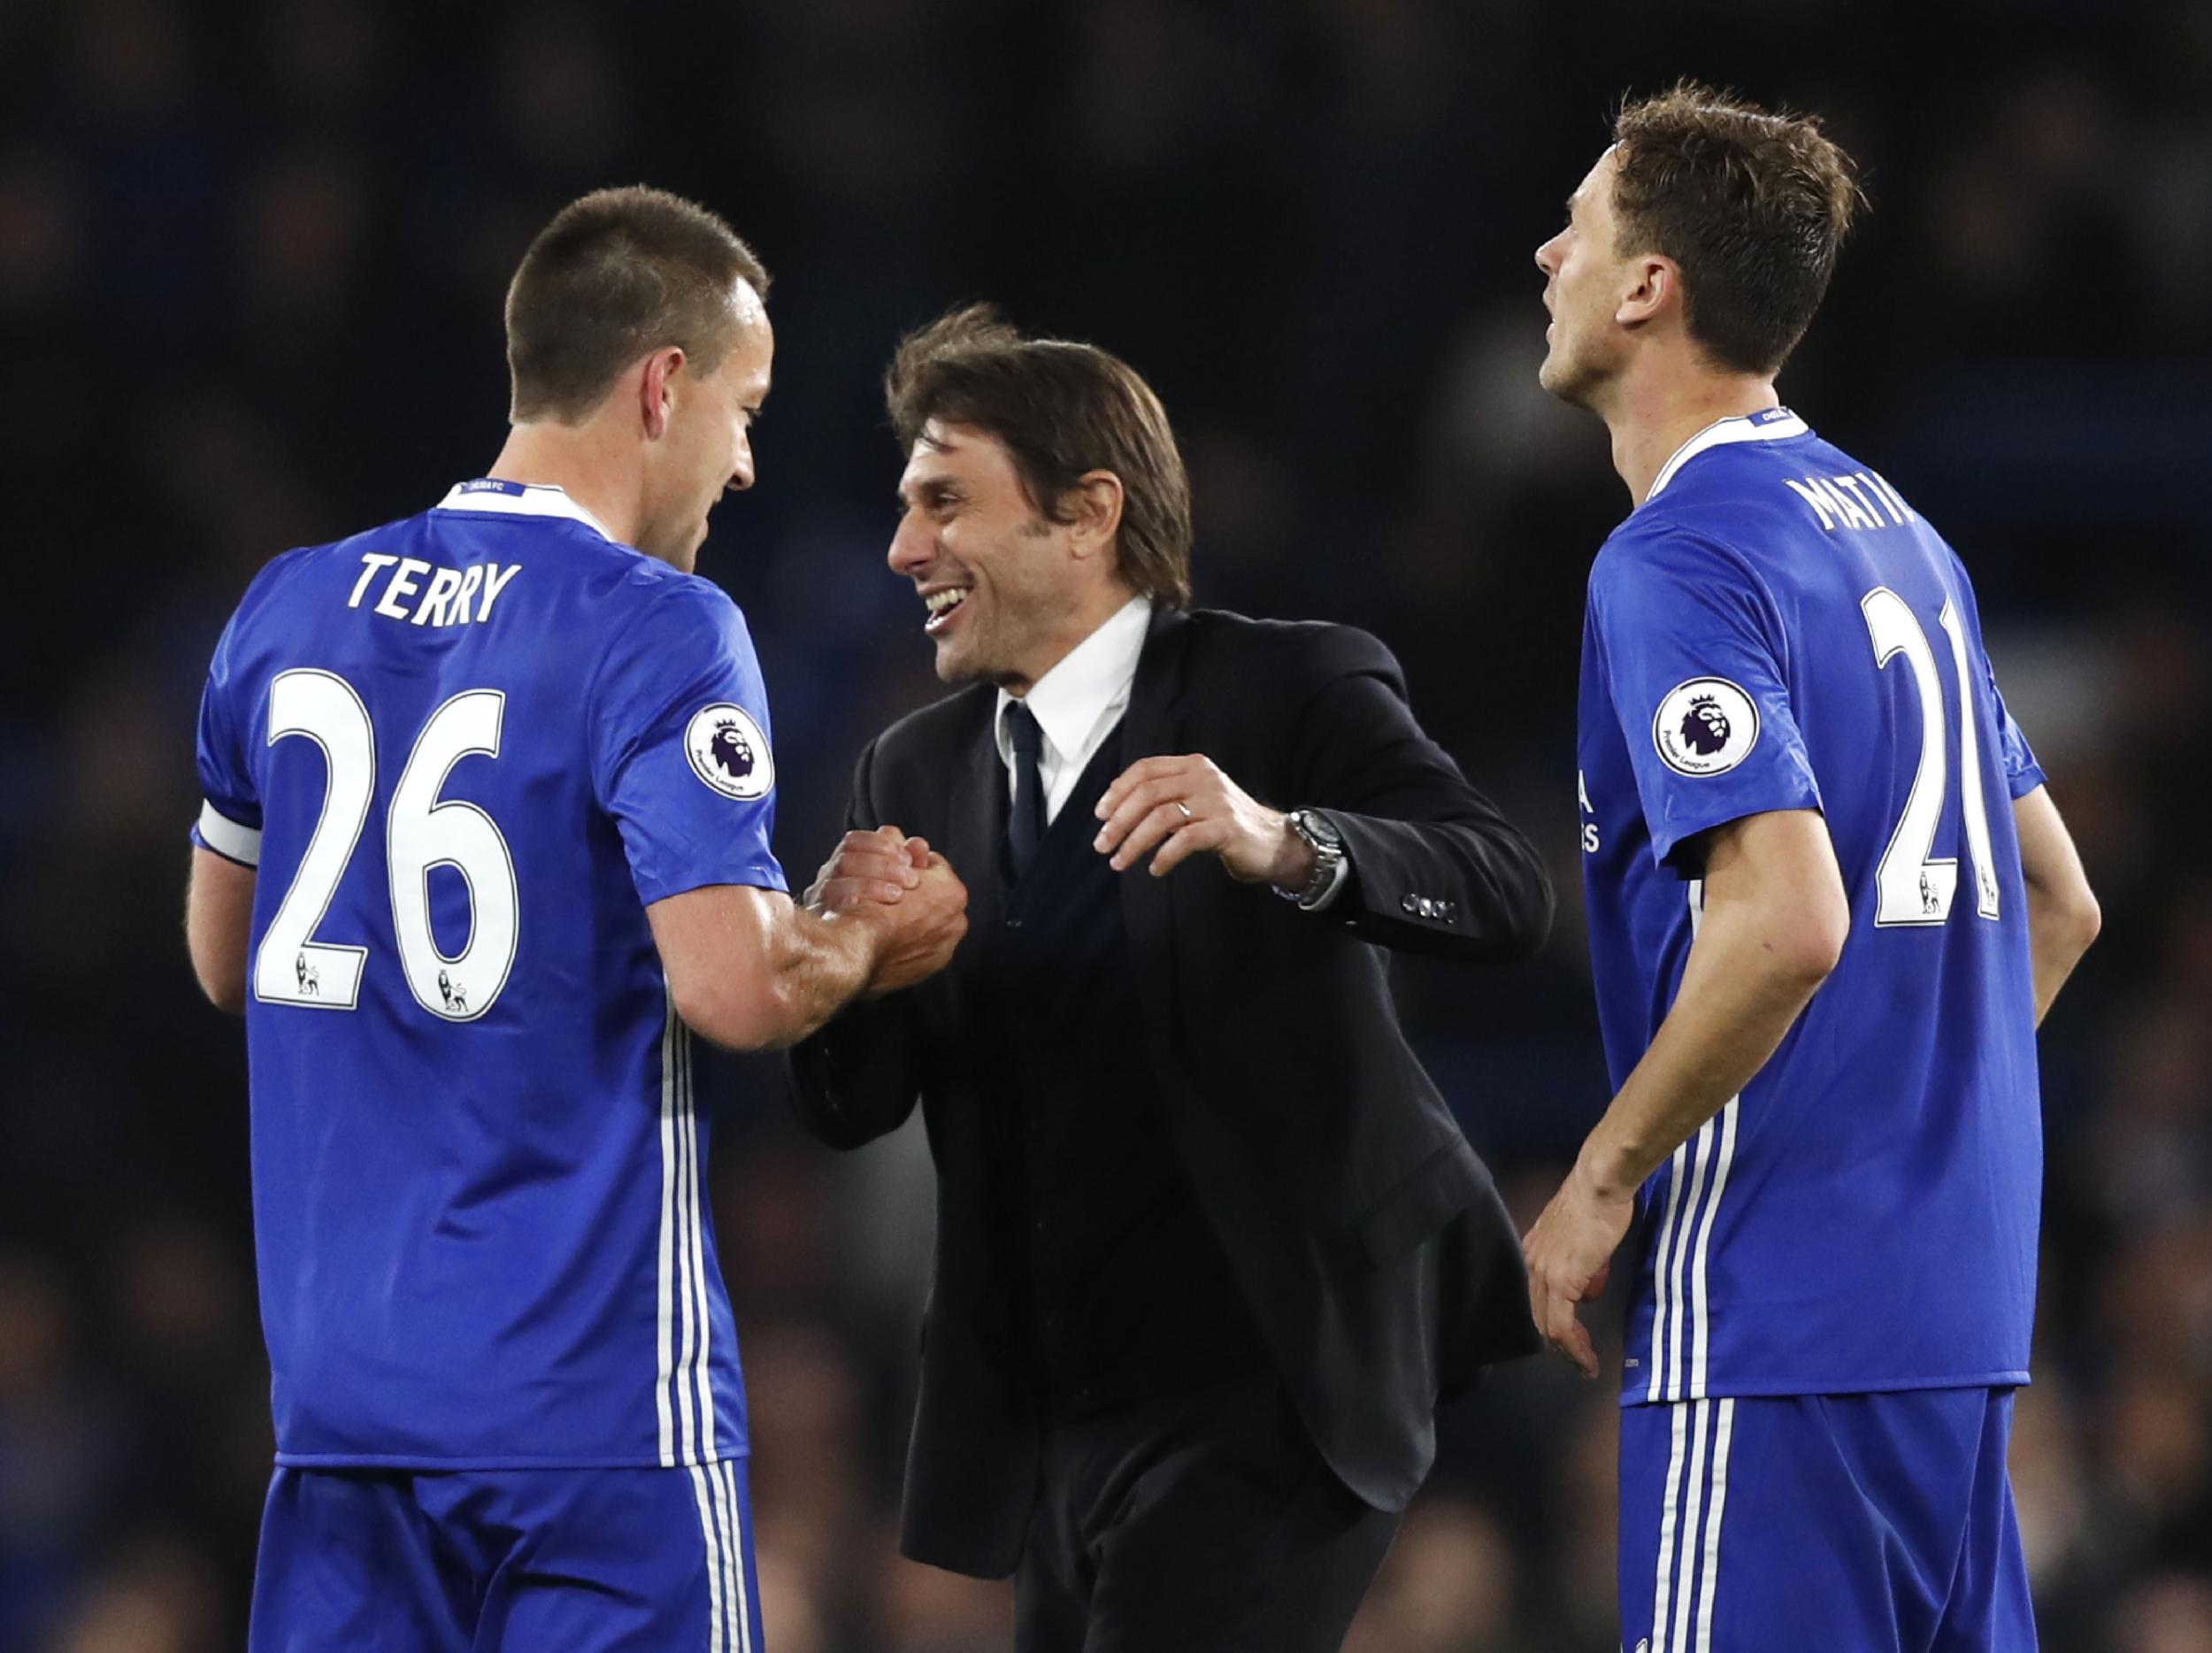 Conte is on the verge of leading Chelsea to the Premier League title